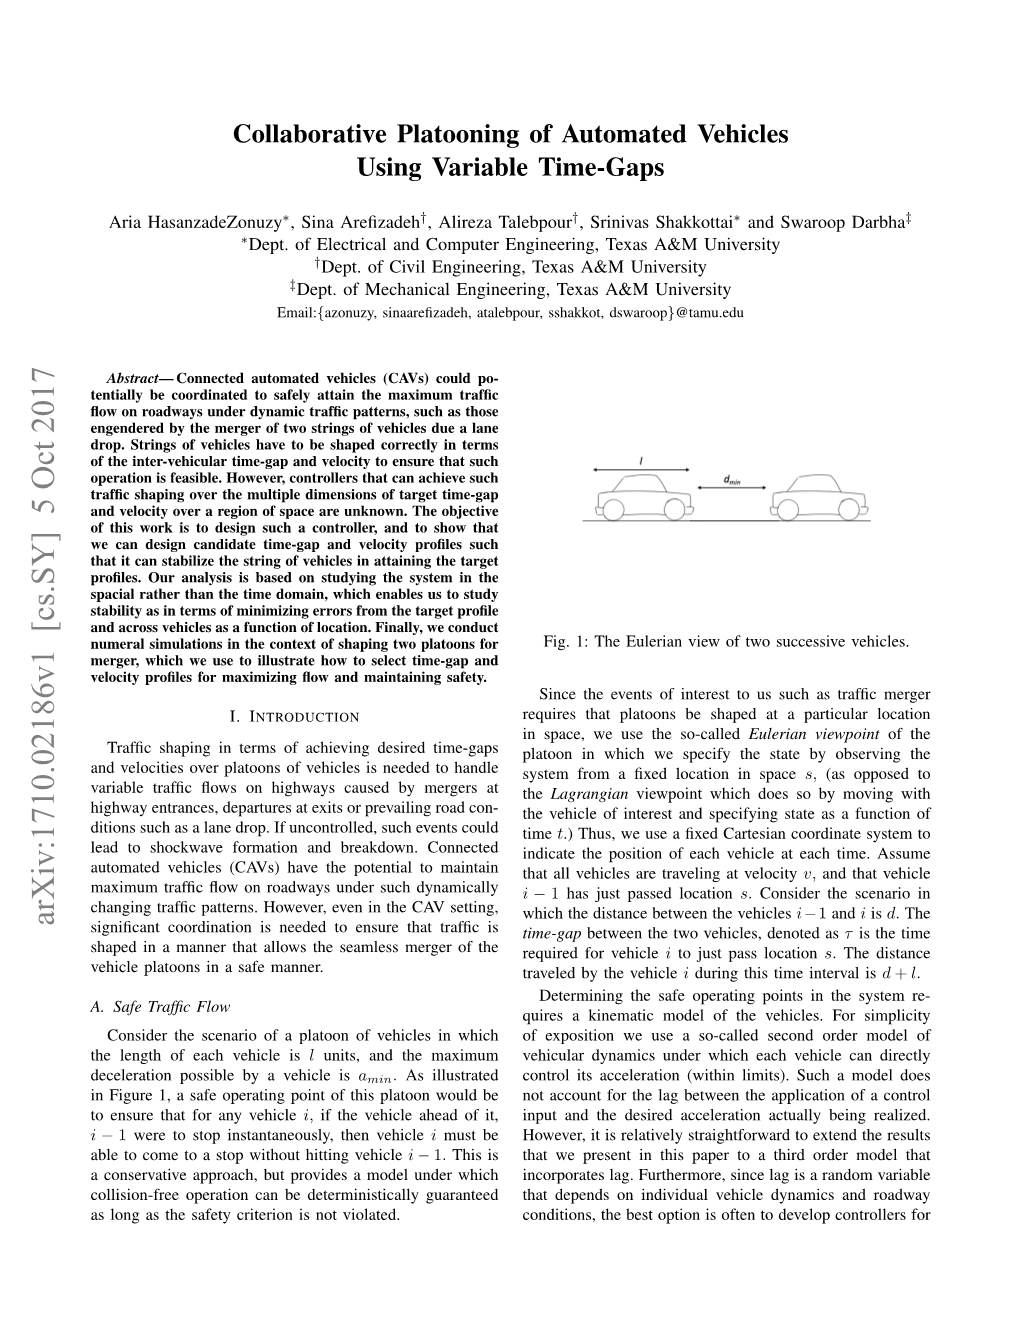 Collaborative Platooning of Automated Vehicles Using Variable Time-Gaps